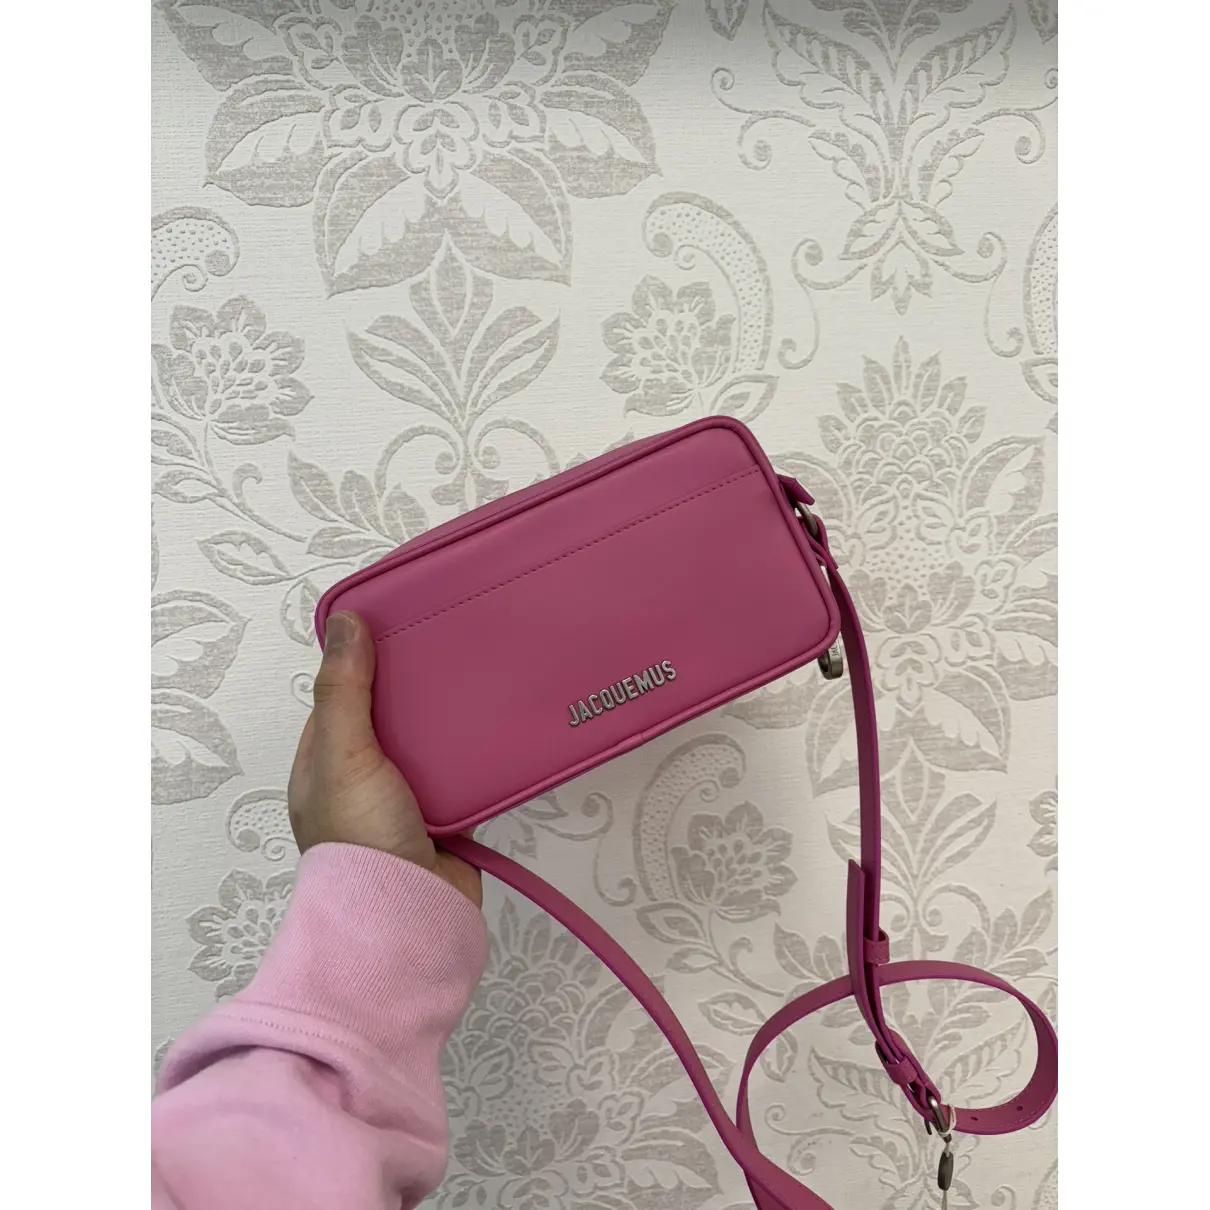 Buy Jacquemus Le Baneto leather crossbody bag online